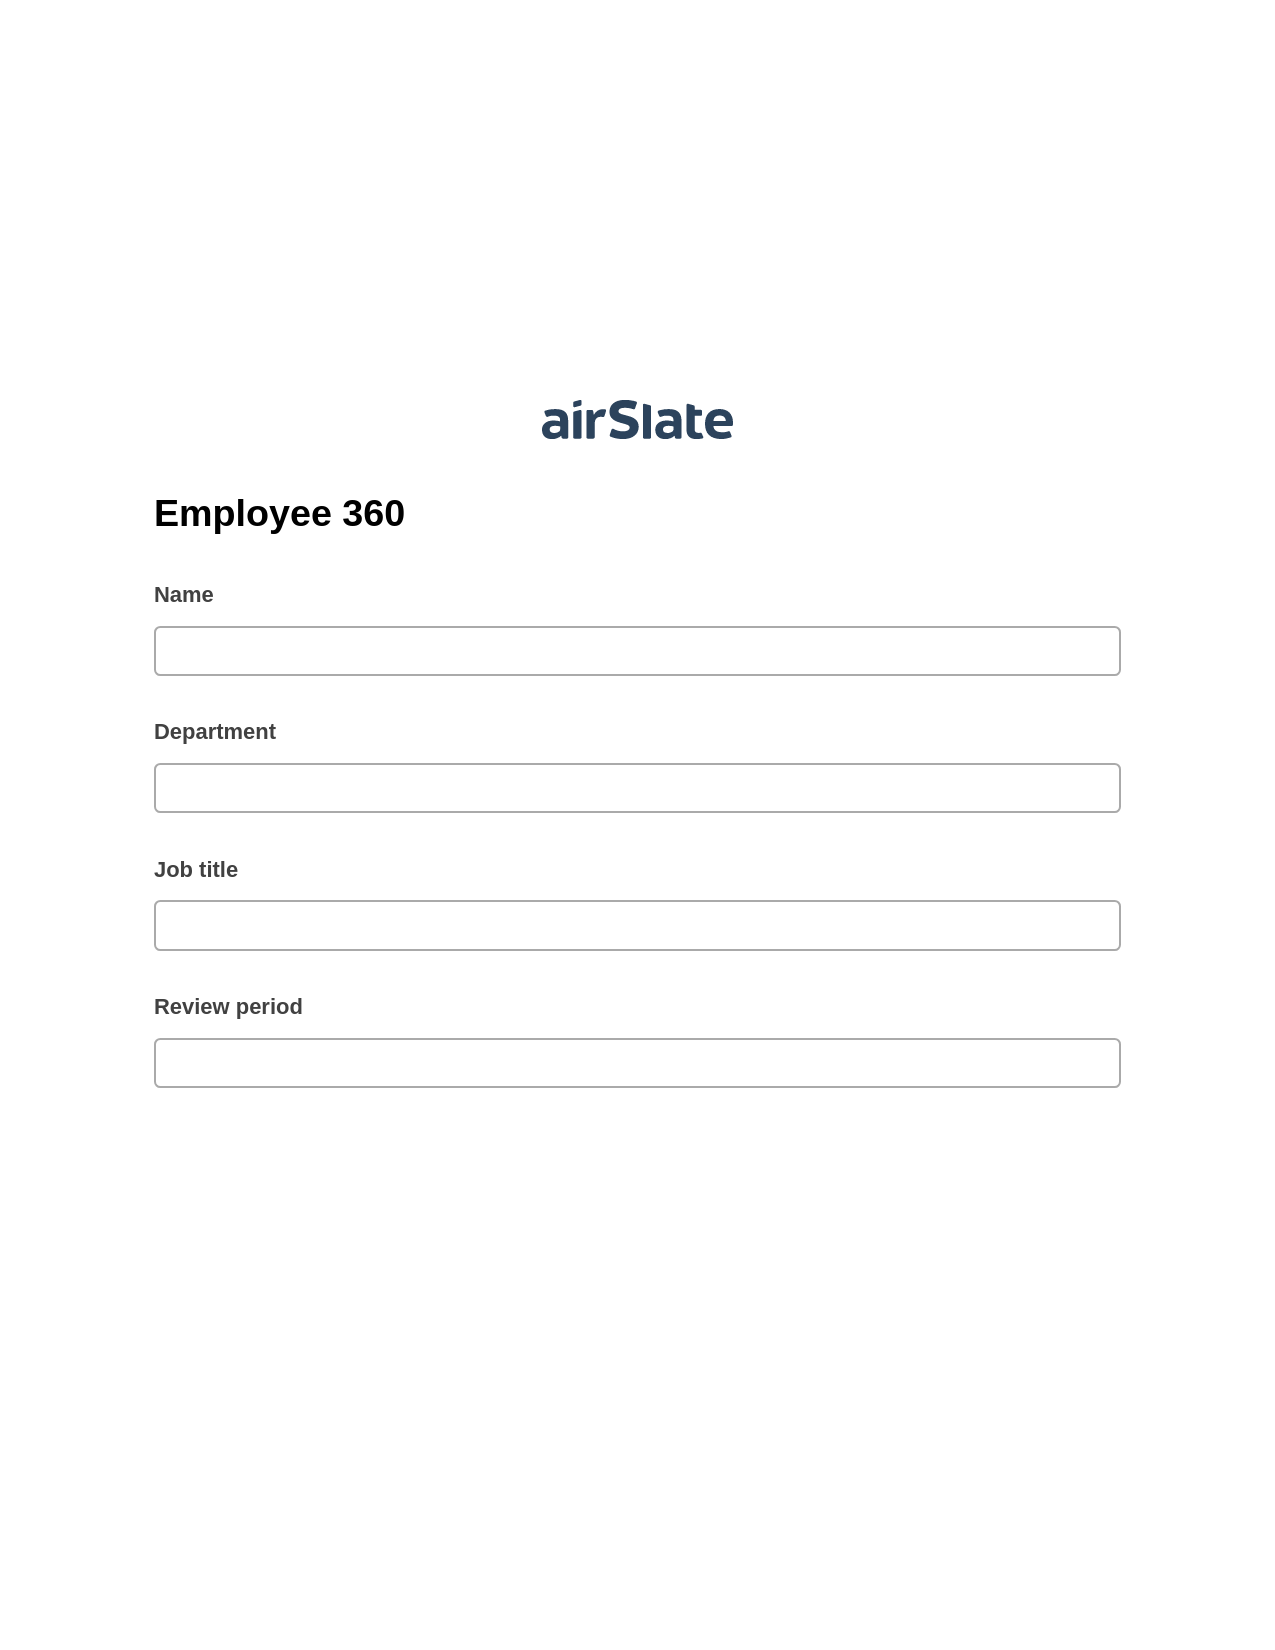 Employee 360 Pre-fill from CSV File Bot, Update MS Dynamics 365 Record Bot, Export to Excel 365 Bot